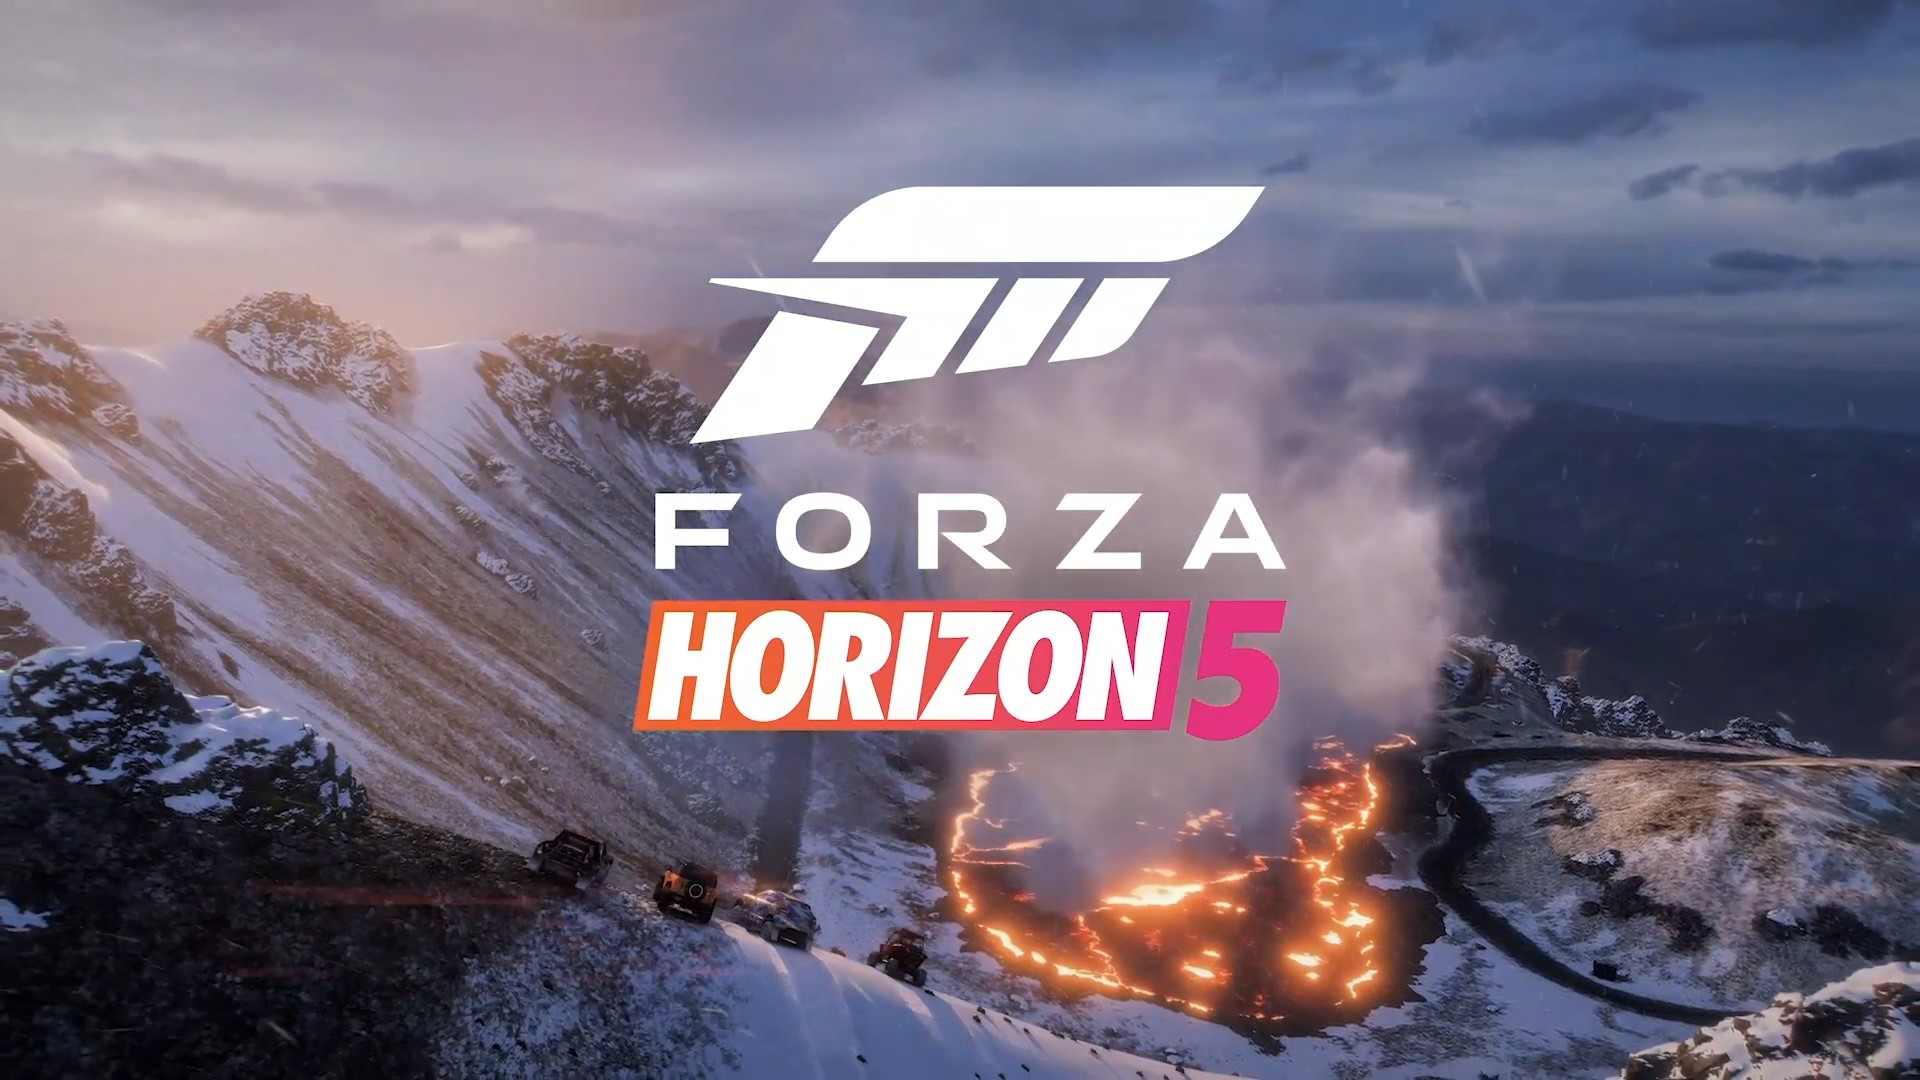 Forza Horizon 3 PC Demo Now Available while Xbox One Demo Receives HDR  Support